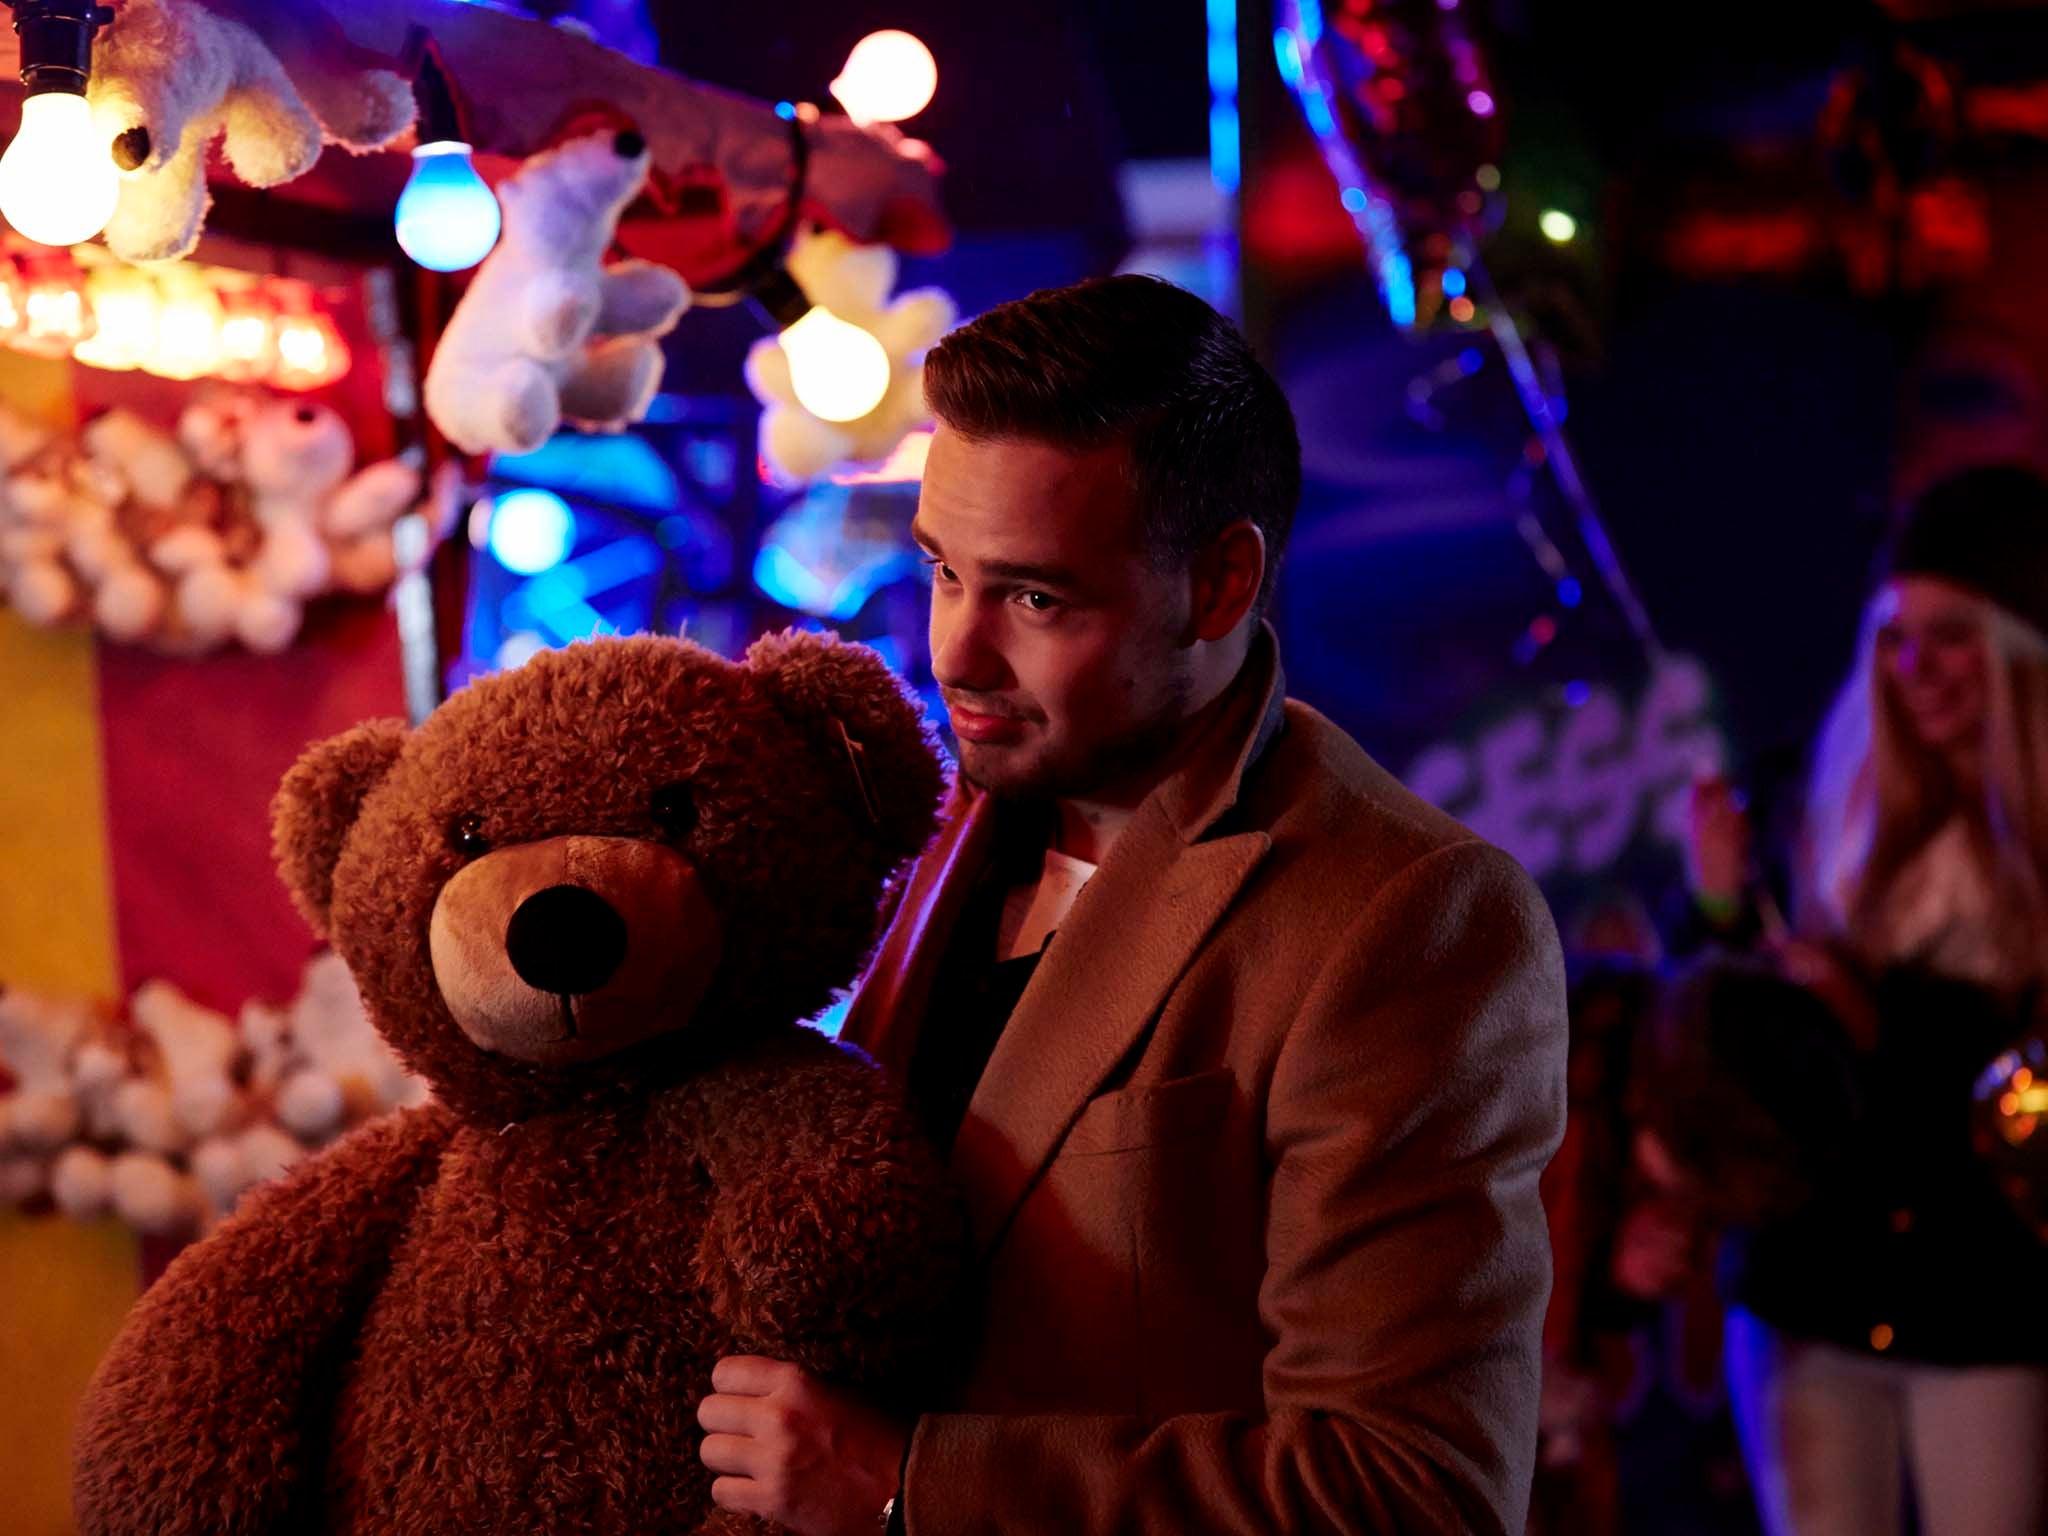 One Direction's Liam Payne romances a mystery lover with a giant teddy bear in the 'Night Changes' music video